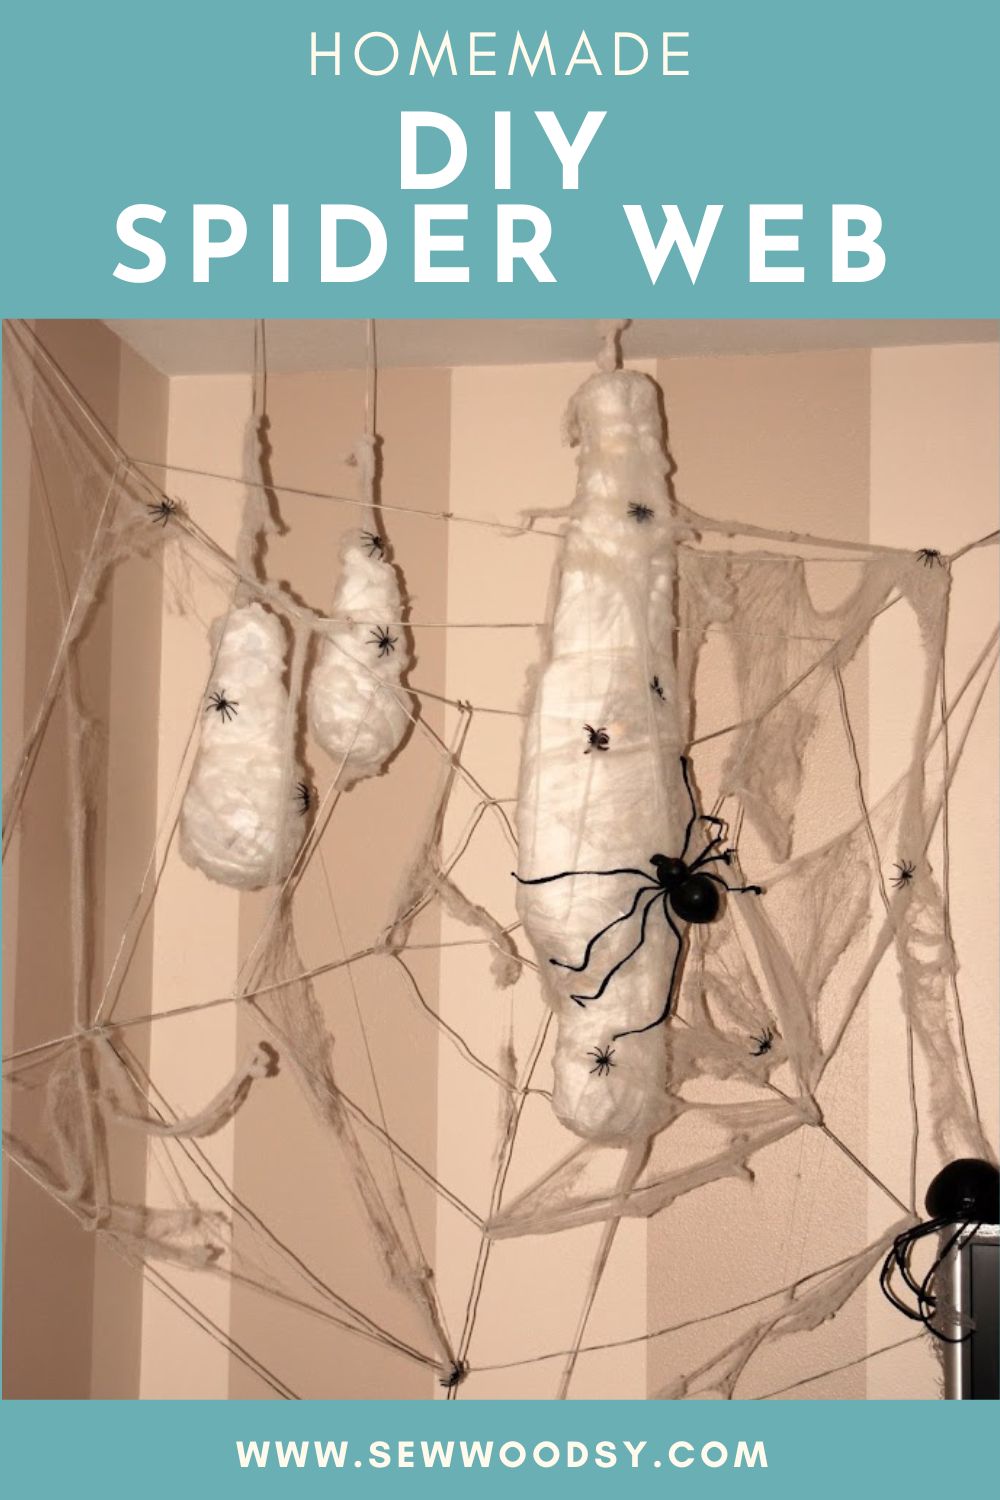 Homemade large spider web with mummy person and large spider with text on image for Pinterest.